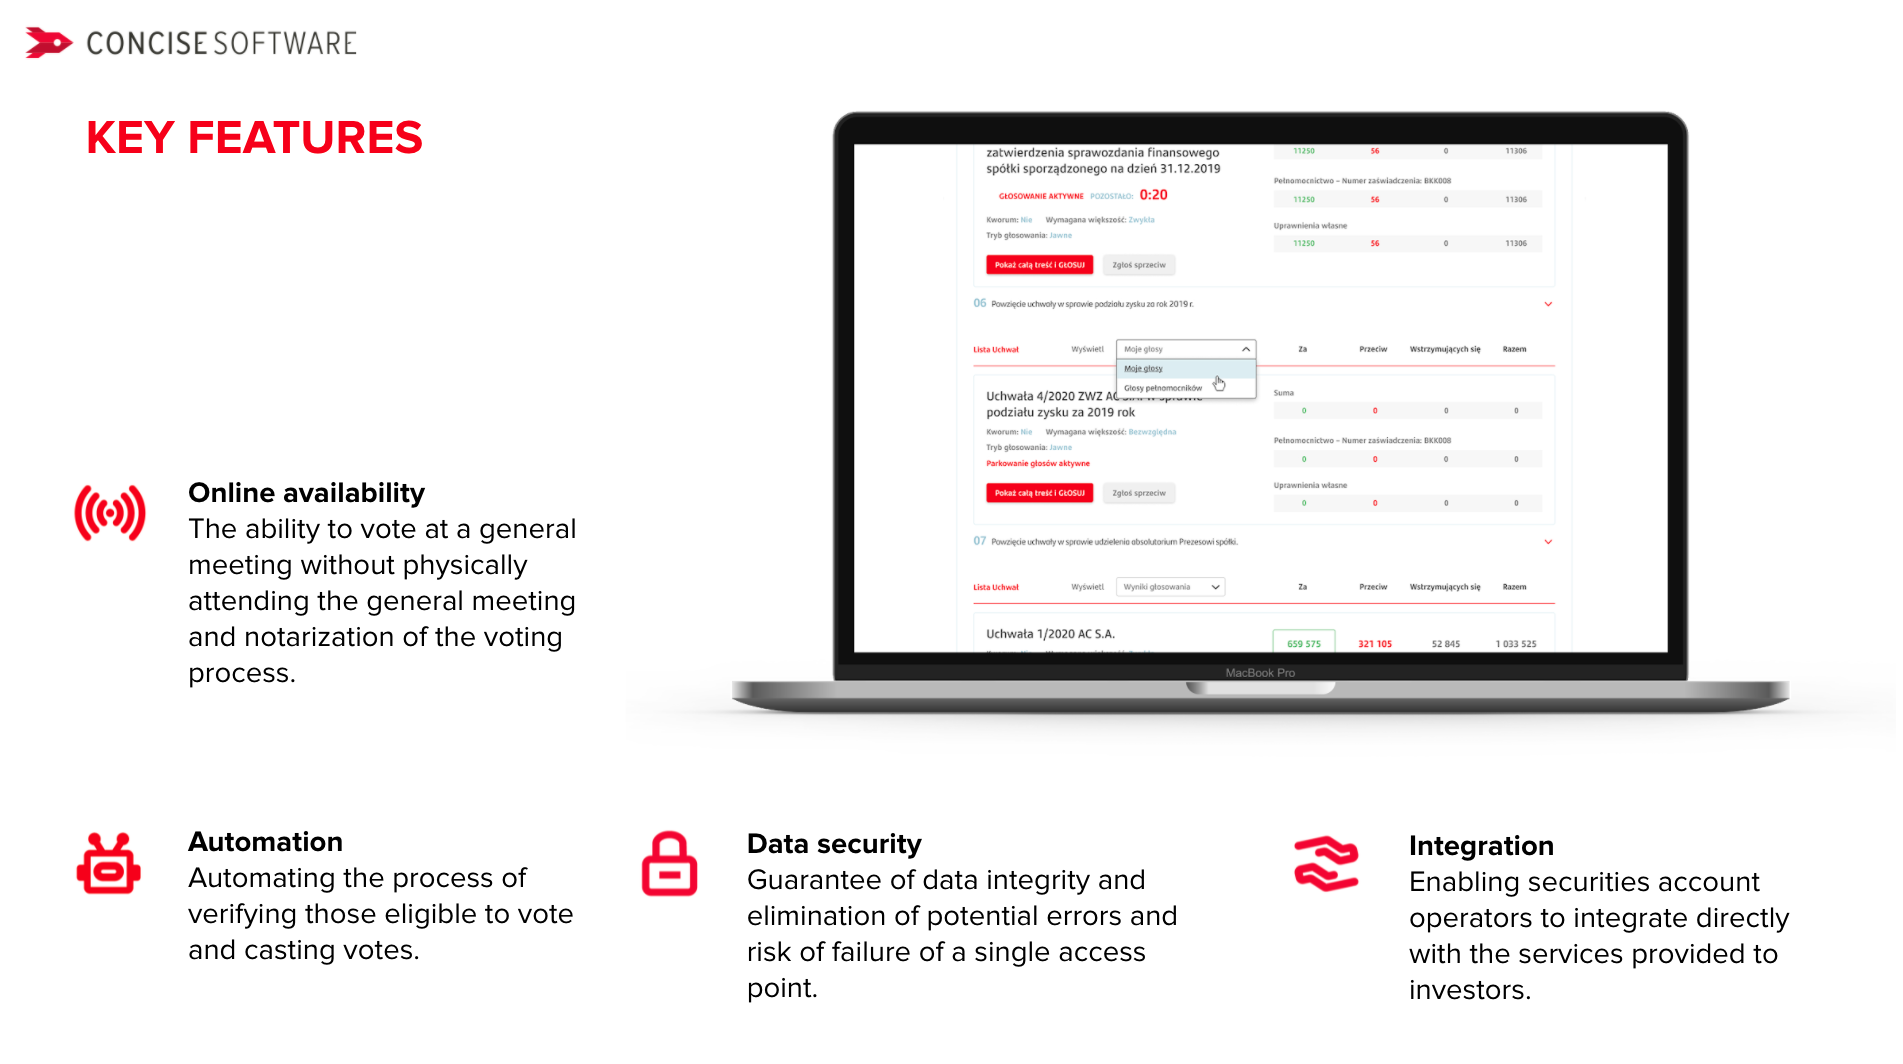 Concise Software Santander eVoting fintech solutions